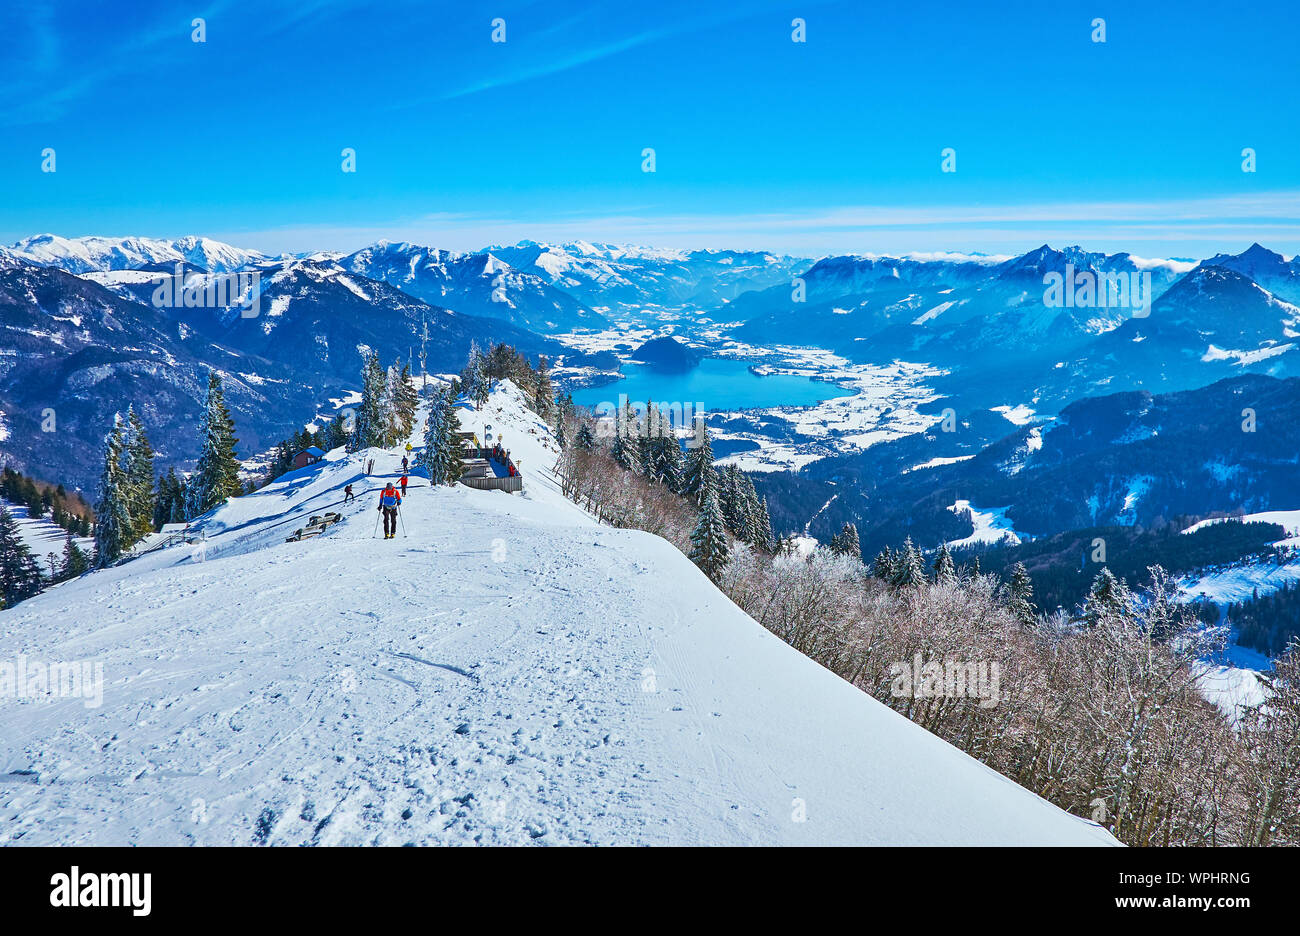 The peak of Zwolferhorn mount is best place to overlook Wolfgangsee lake, Alpine scenery and watch the skiers on downhill, St Gilgen, Salzkammergut, A Stock Photo